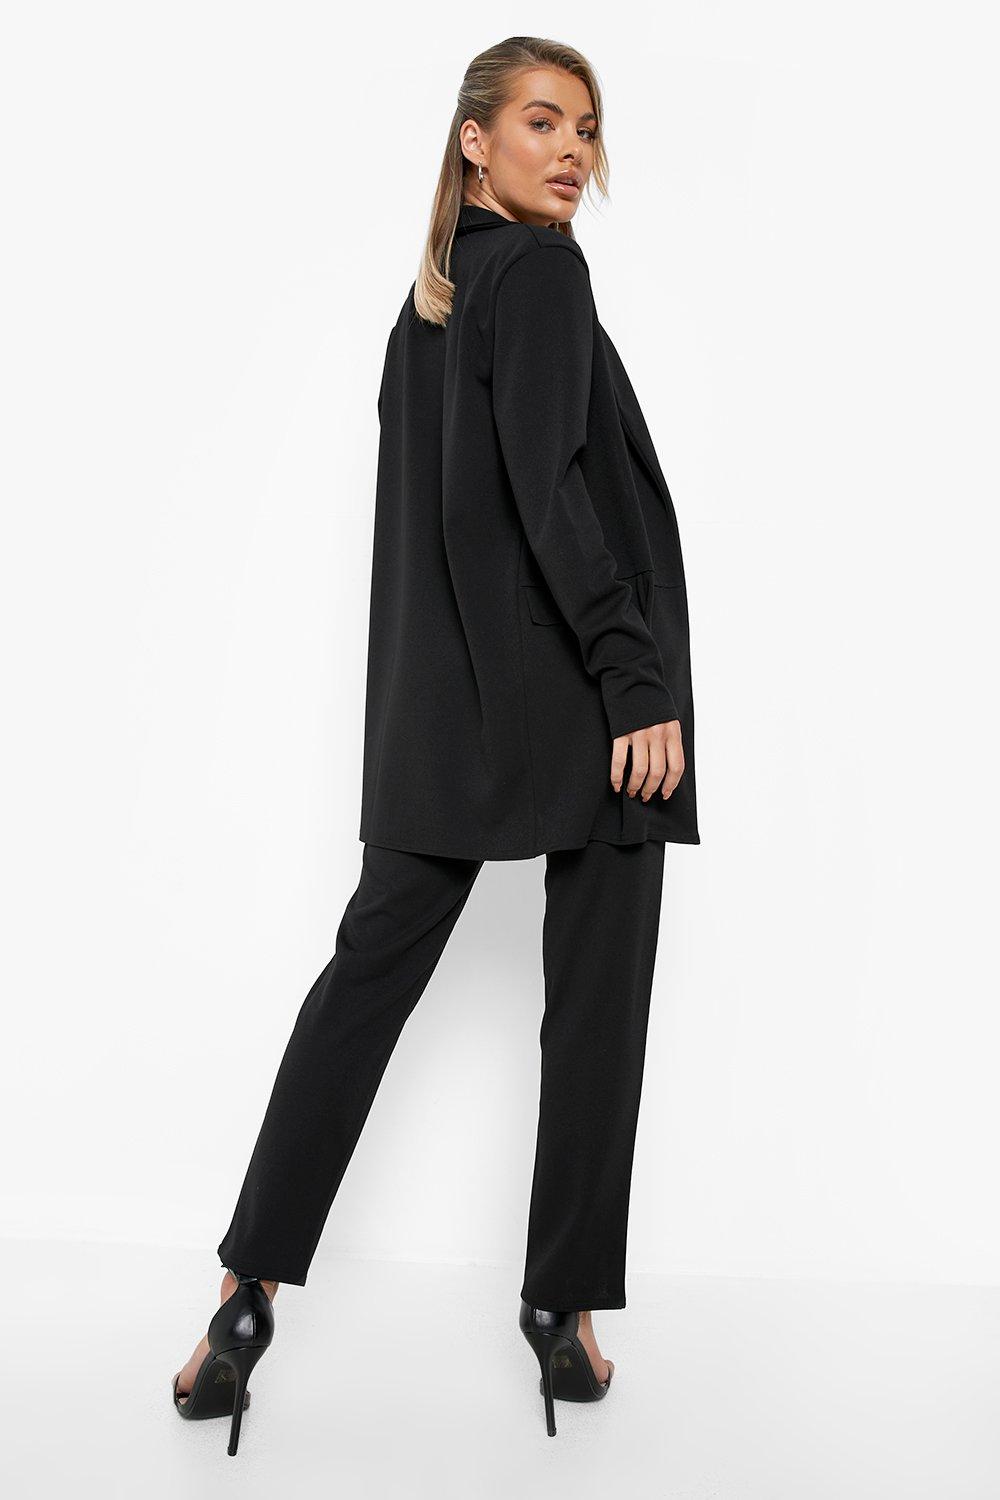 Womens Clothing Suits Boohoo Tailored Blazer & Belted Trouser Suit in Black Save 3% 